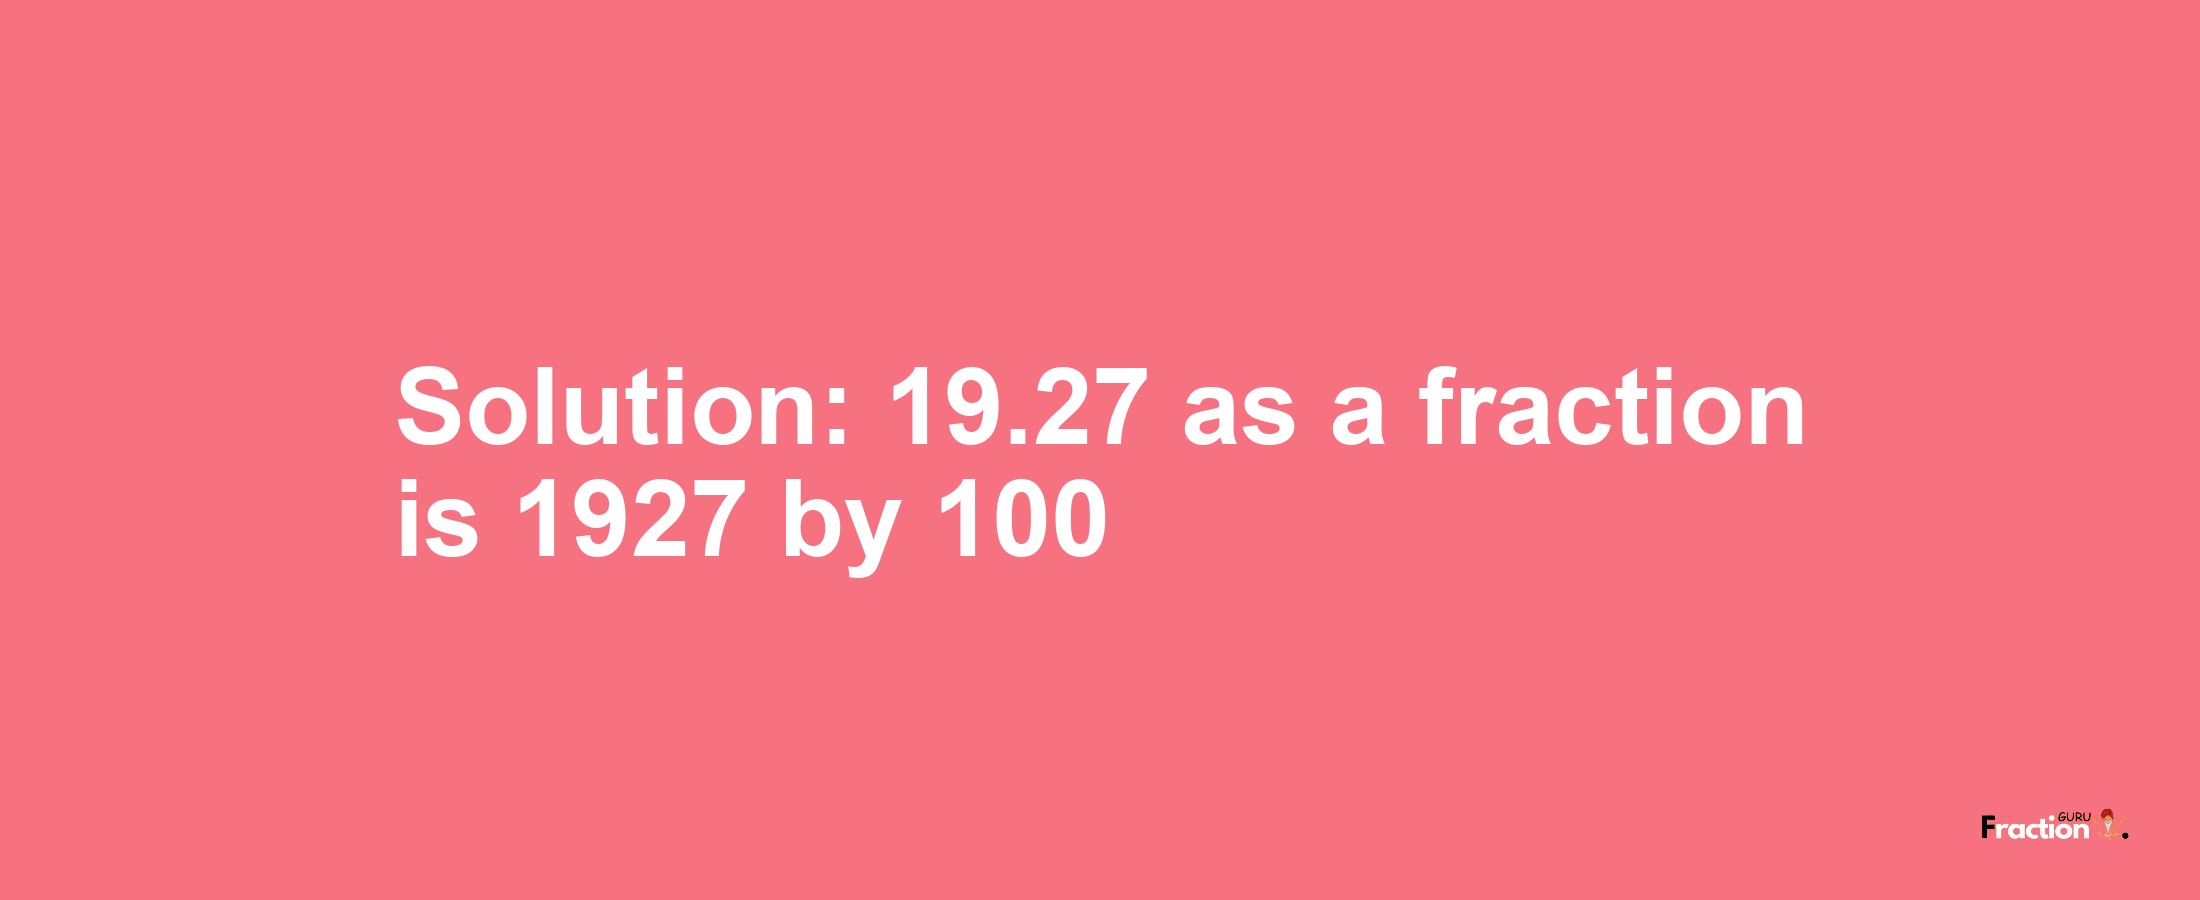 Solution:19.27 as a fraction is 1927/100